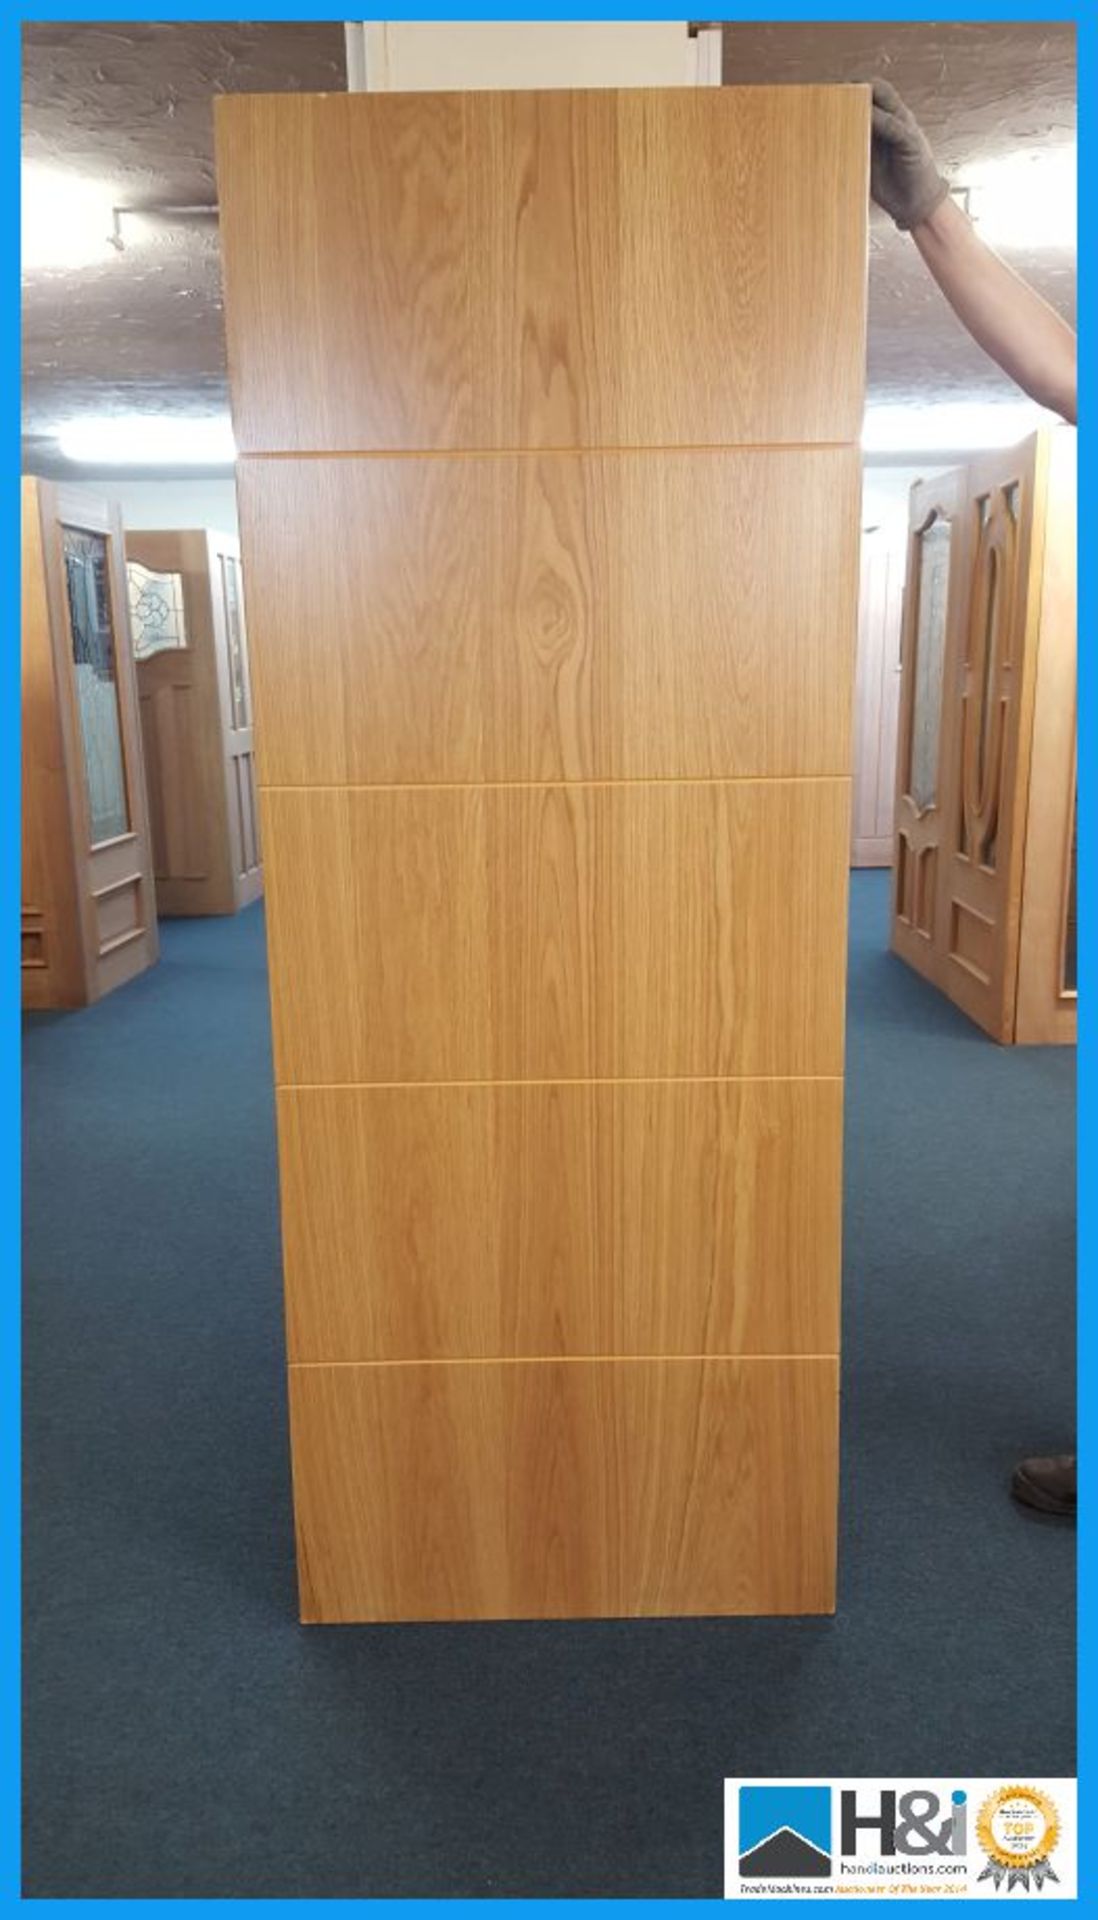 New, pre-finished oak veneer fire door. 78x30x1.75 inches. RRP £190. Appraisal: Viewing Essential